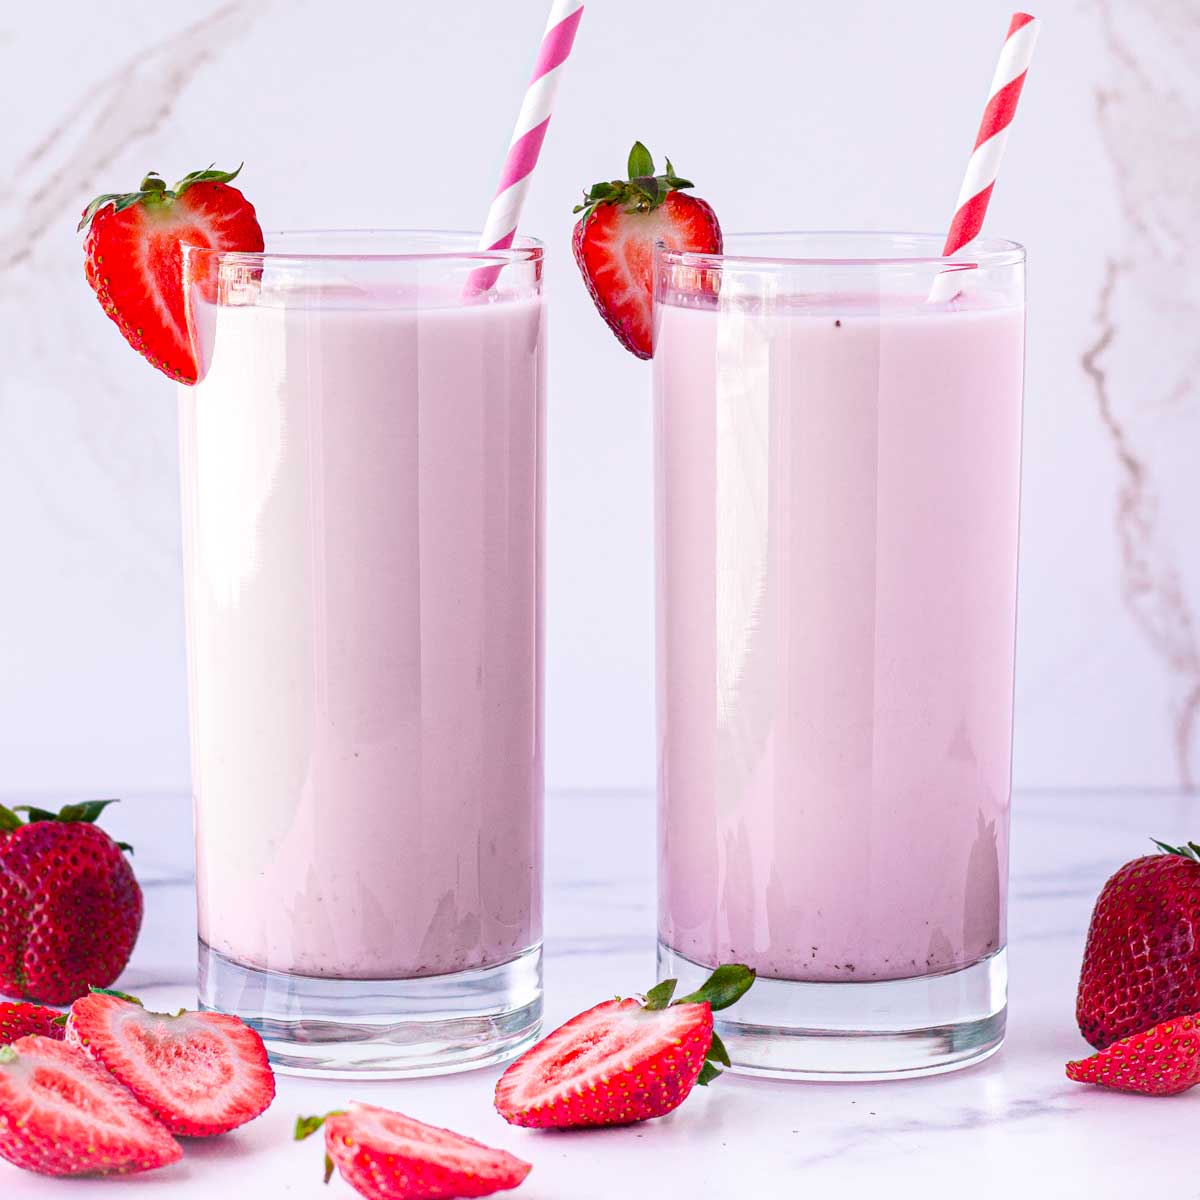 Homemade Strawberry Milk - Cooking For My Soul